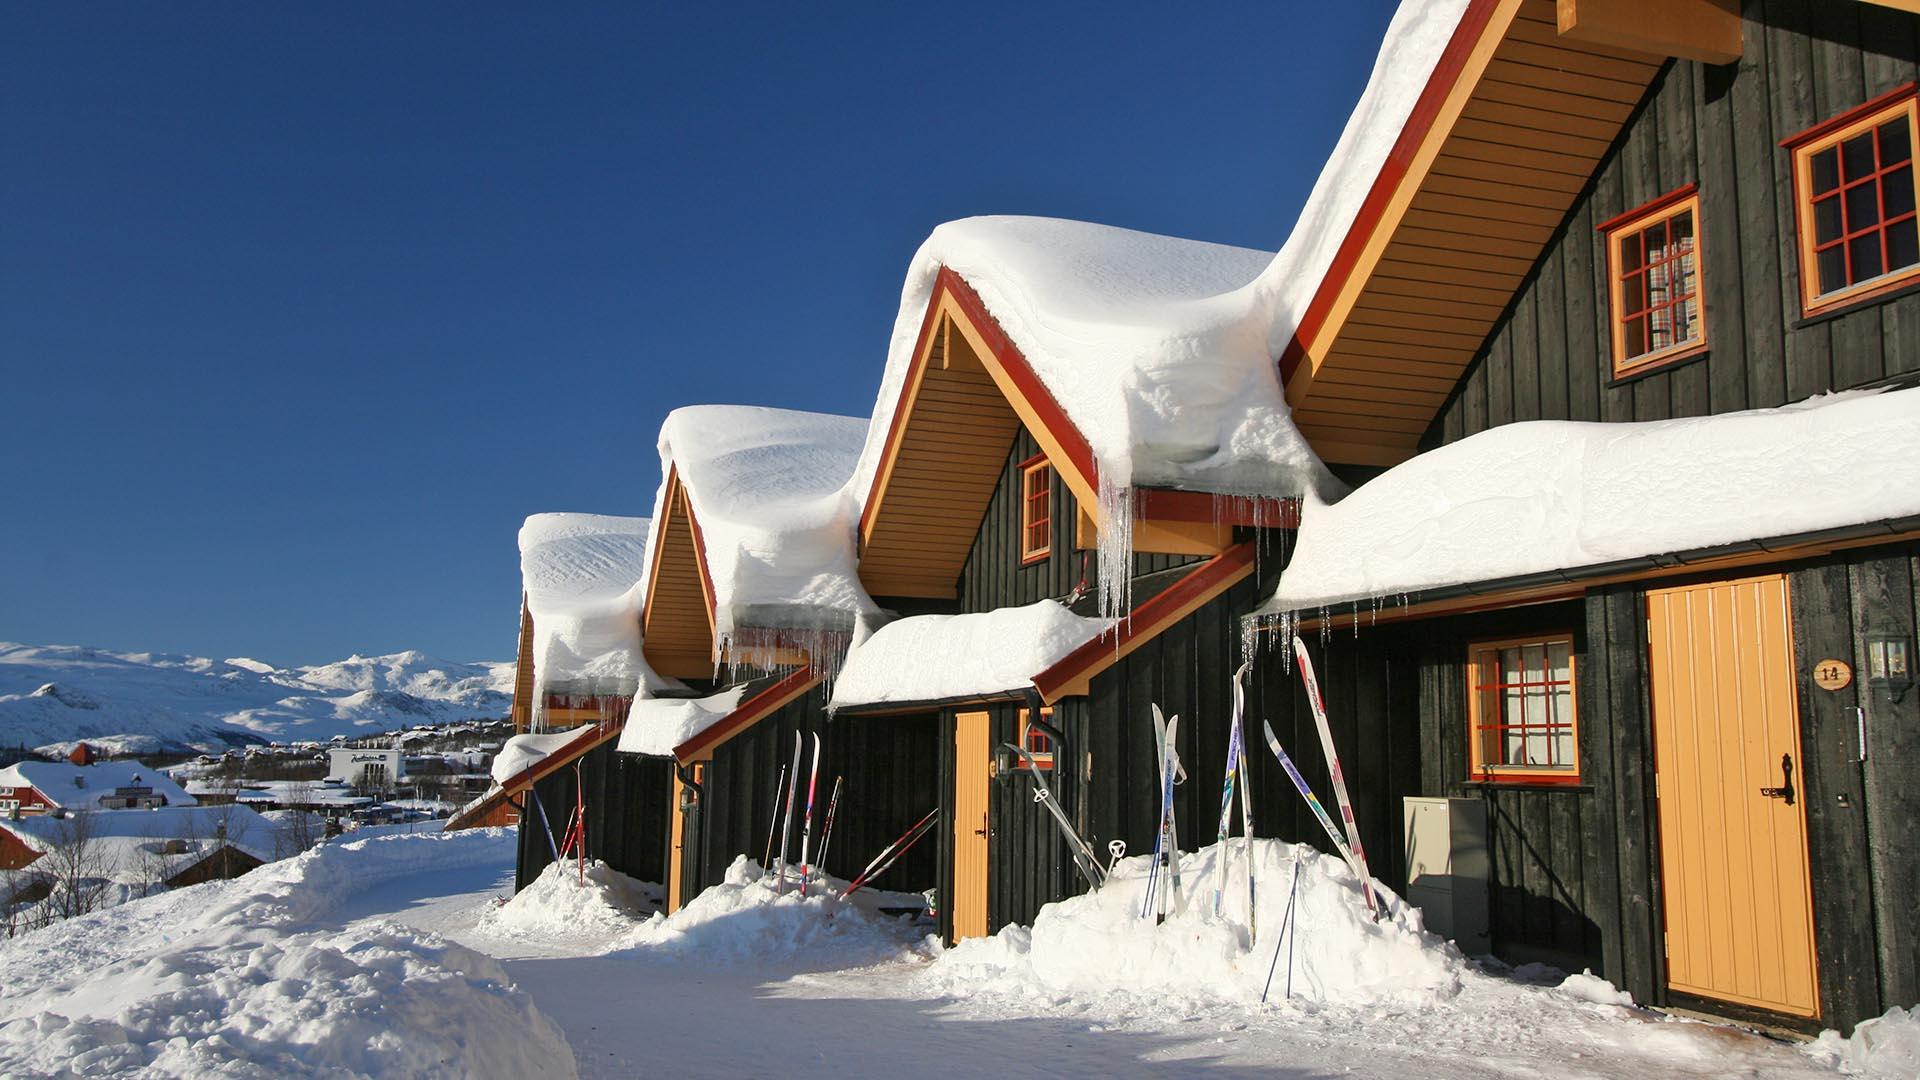 Dark brown wooden attached cabins with lots of snow on the roofs on the sunny side of the hill of a mountain village (seen in the background).